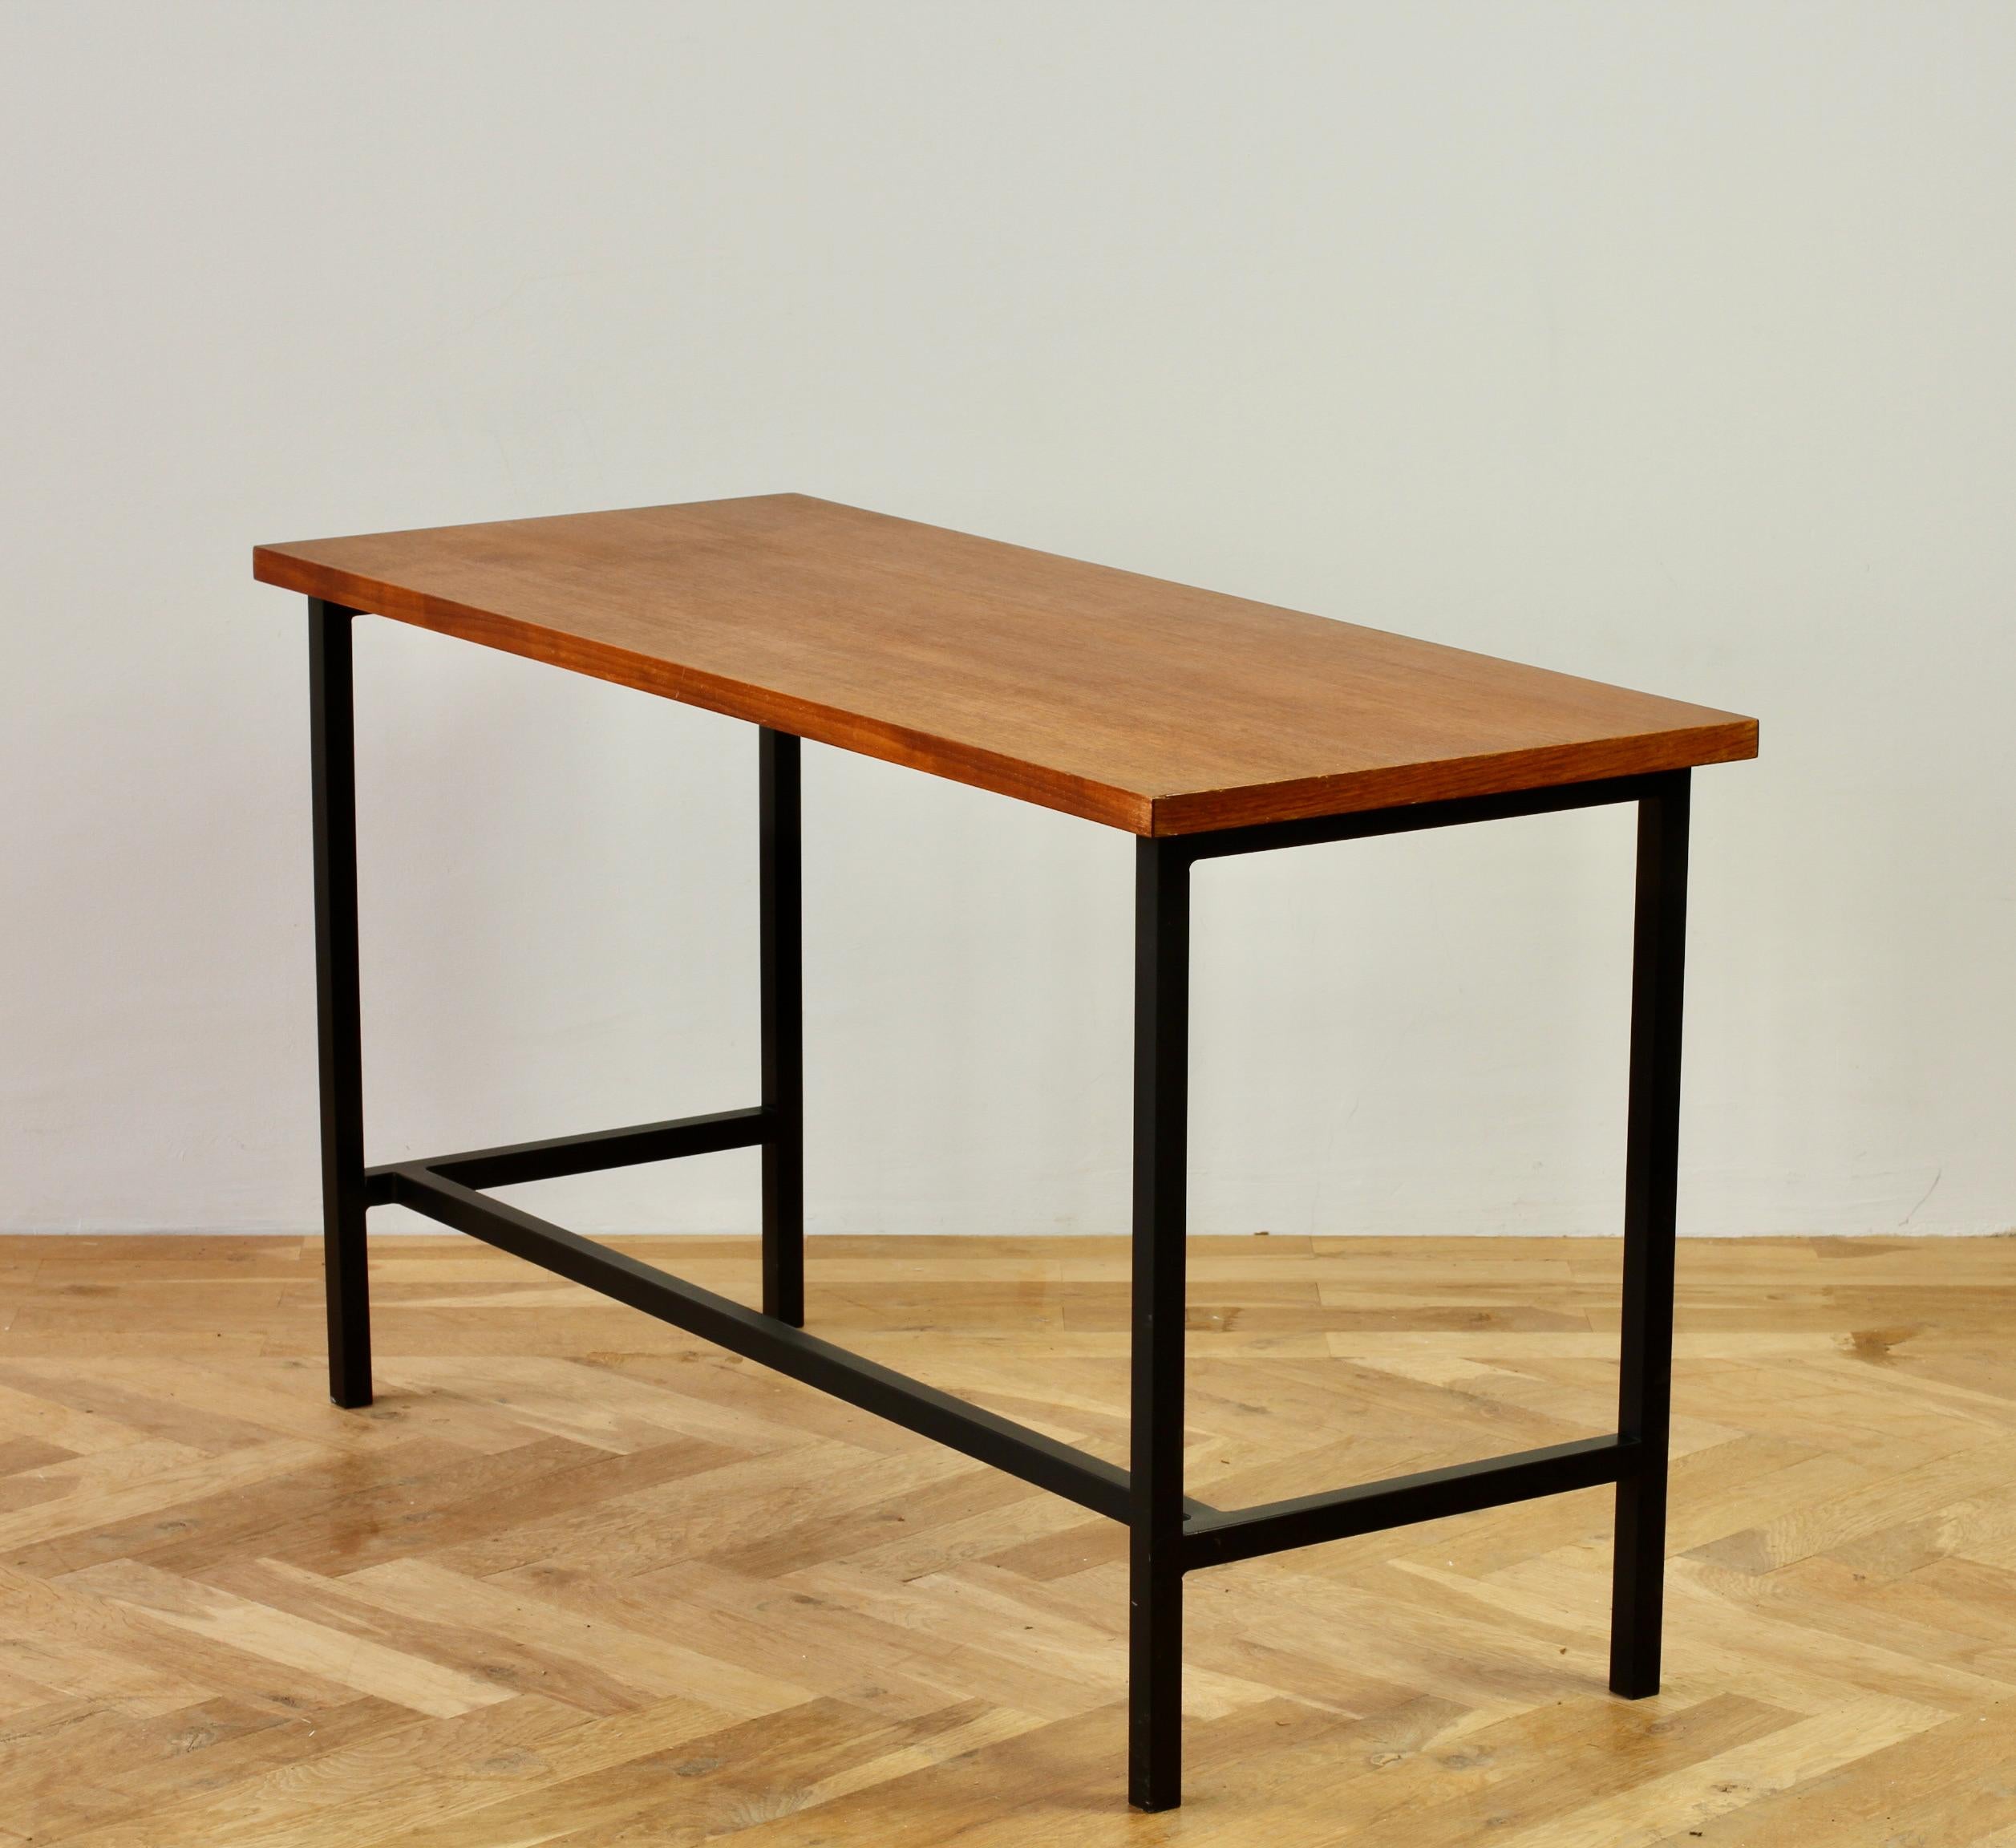 Florence Knoll 1950s Mid-Century Wood Veneer Black Frame Desk or Console Table In Good Condition For Sale In Landau an der Isar, Bayern